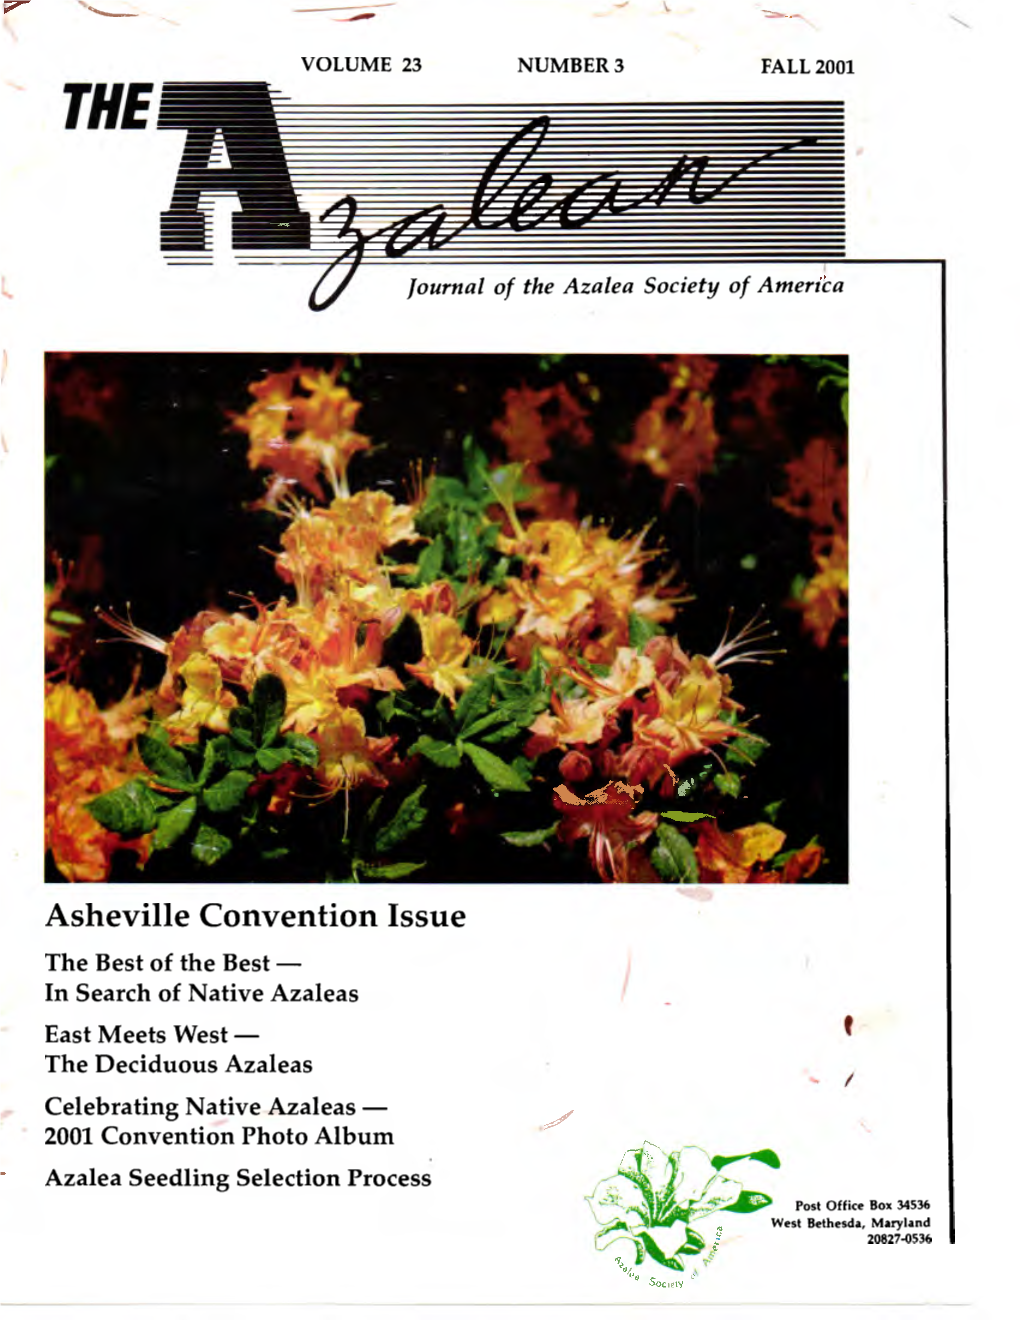 Asheville Convention Issue